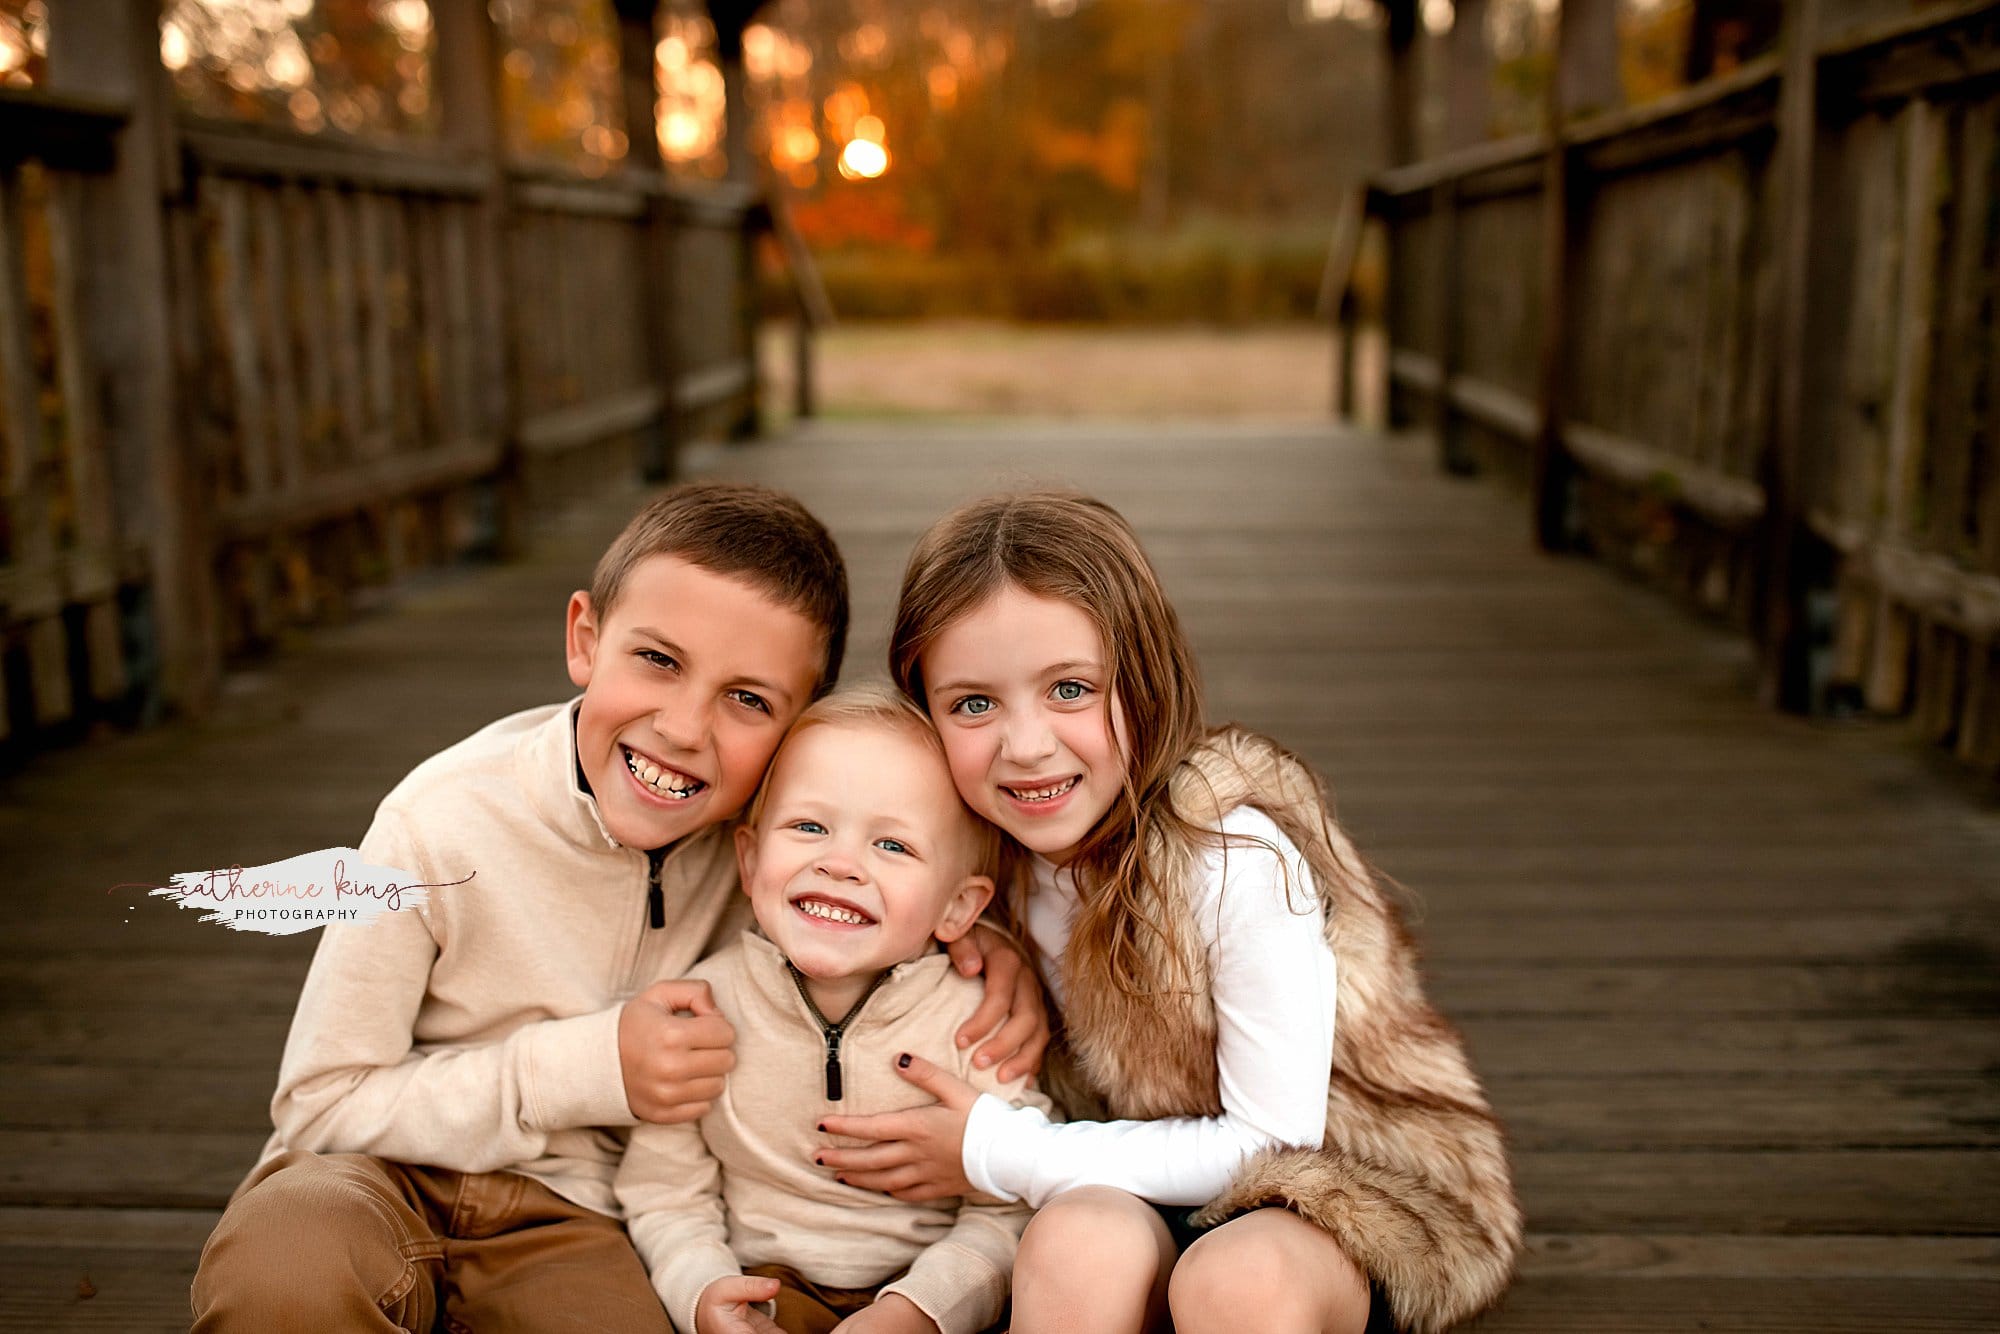 Wrapping up the Fall photography season | CT Family Photographer